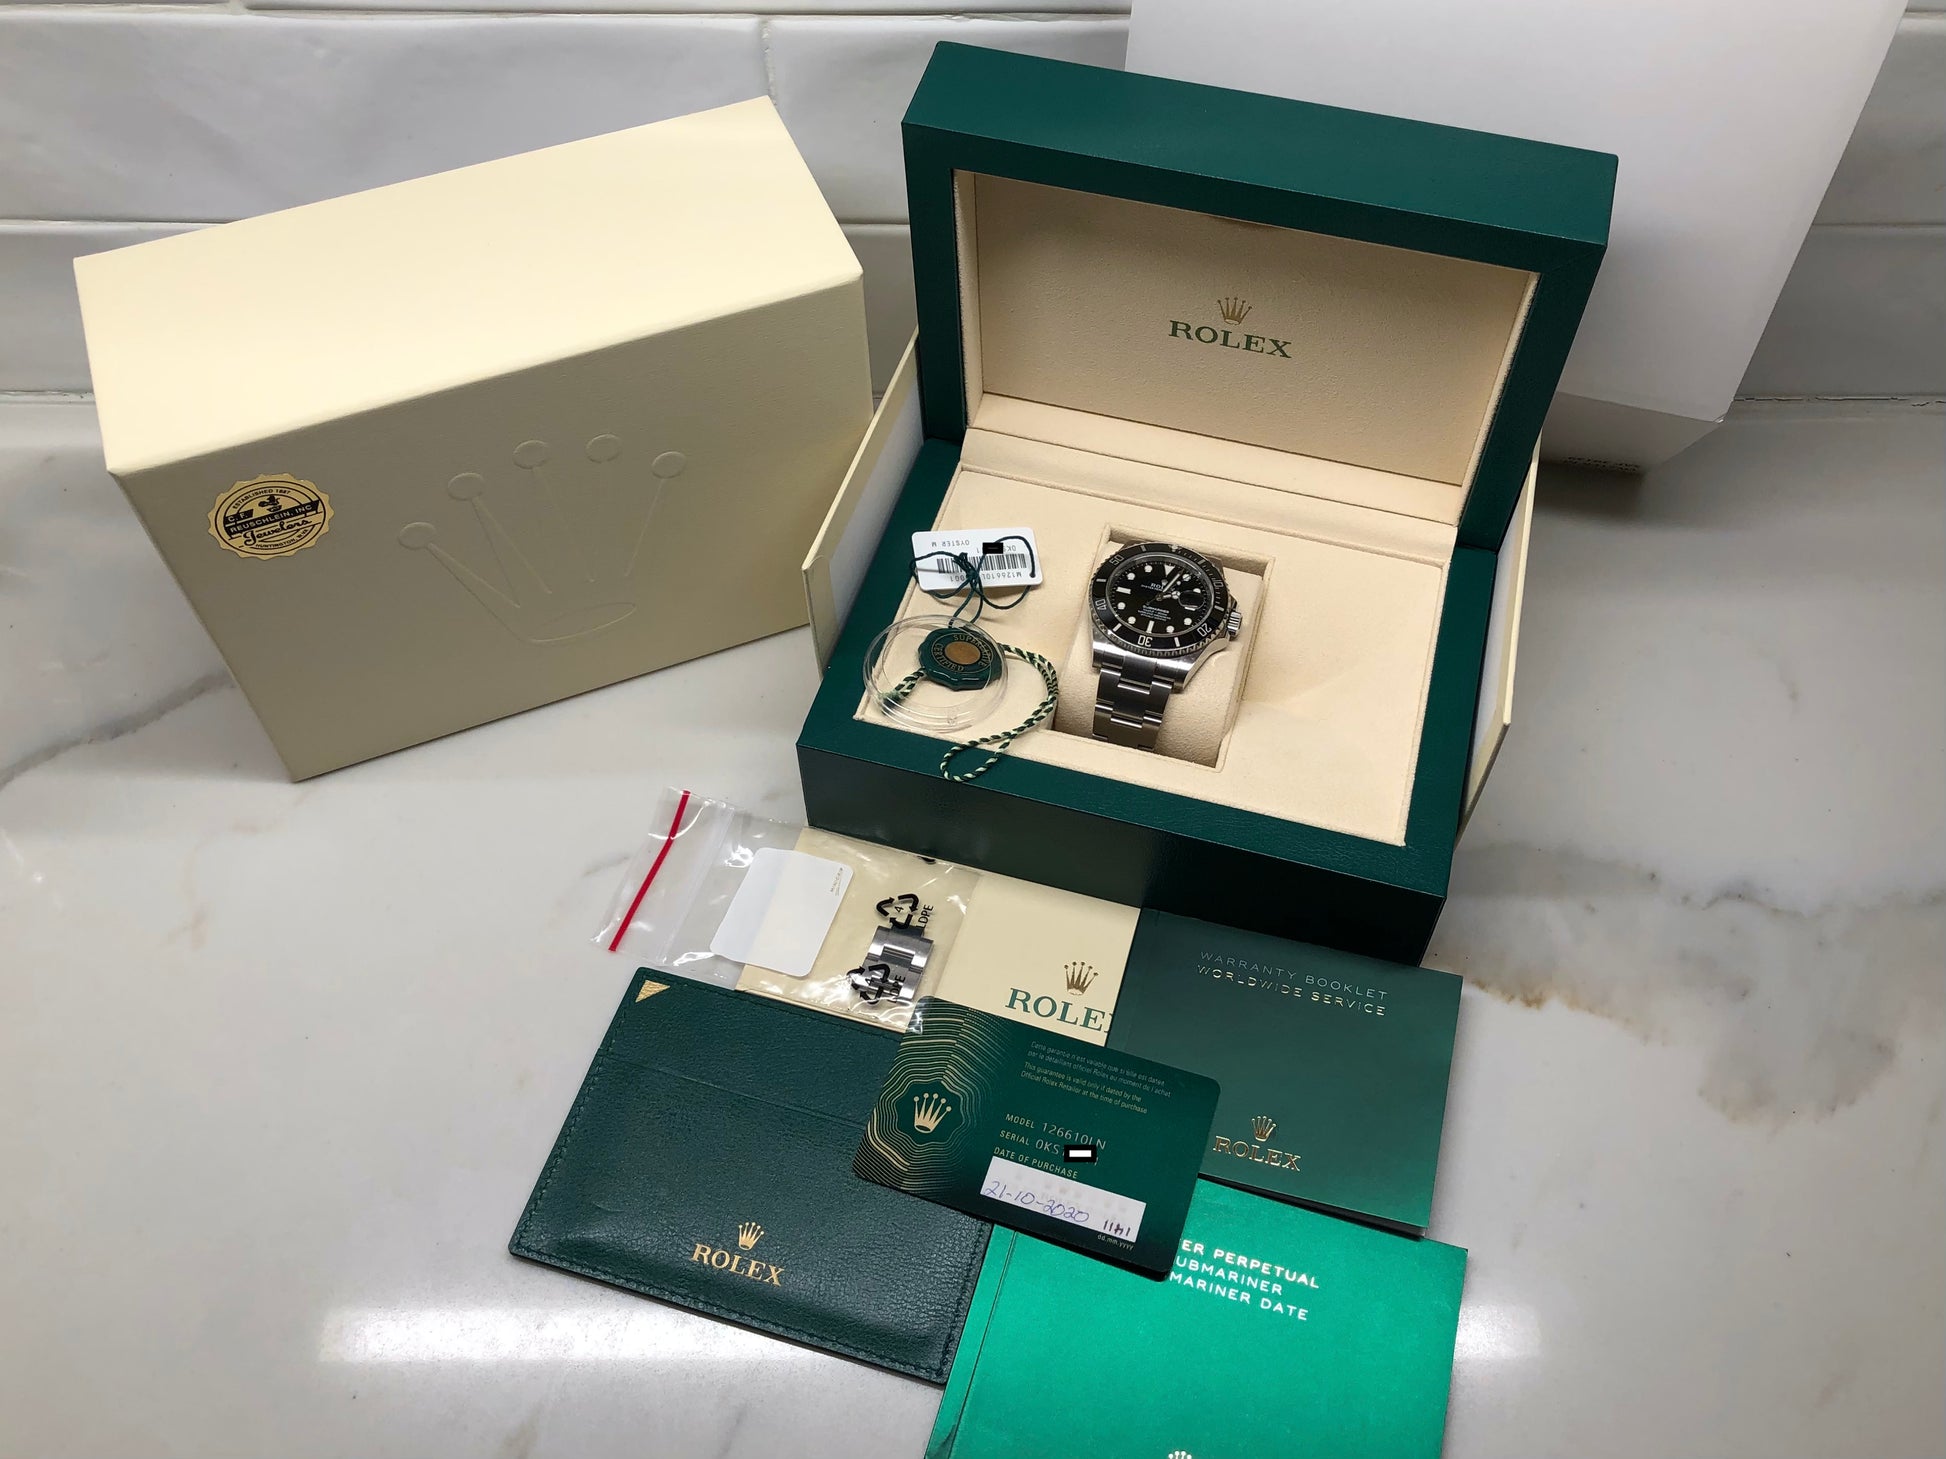 2020 Rolex Submariner Date 126610LN Ceramic 41mm Oyster Perpetual Steel Wristwatch Box Papers - Hashtag Watch Co.